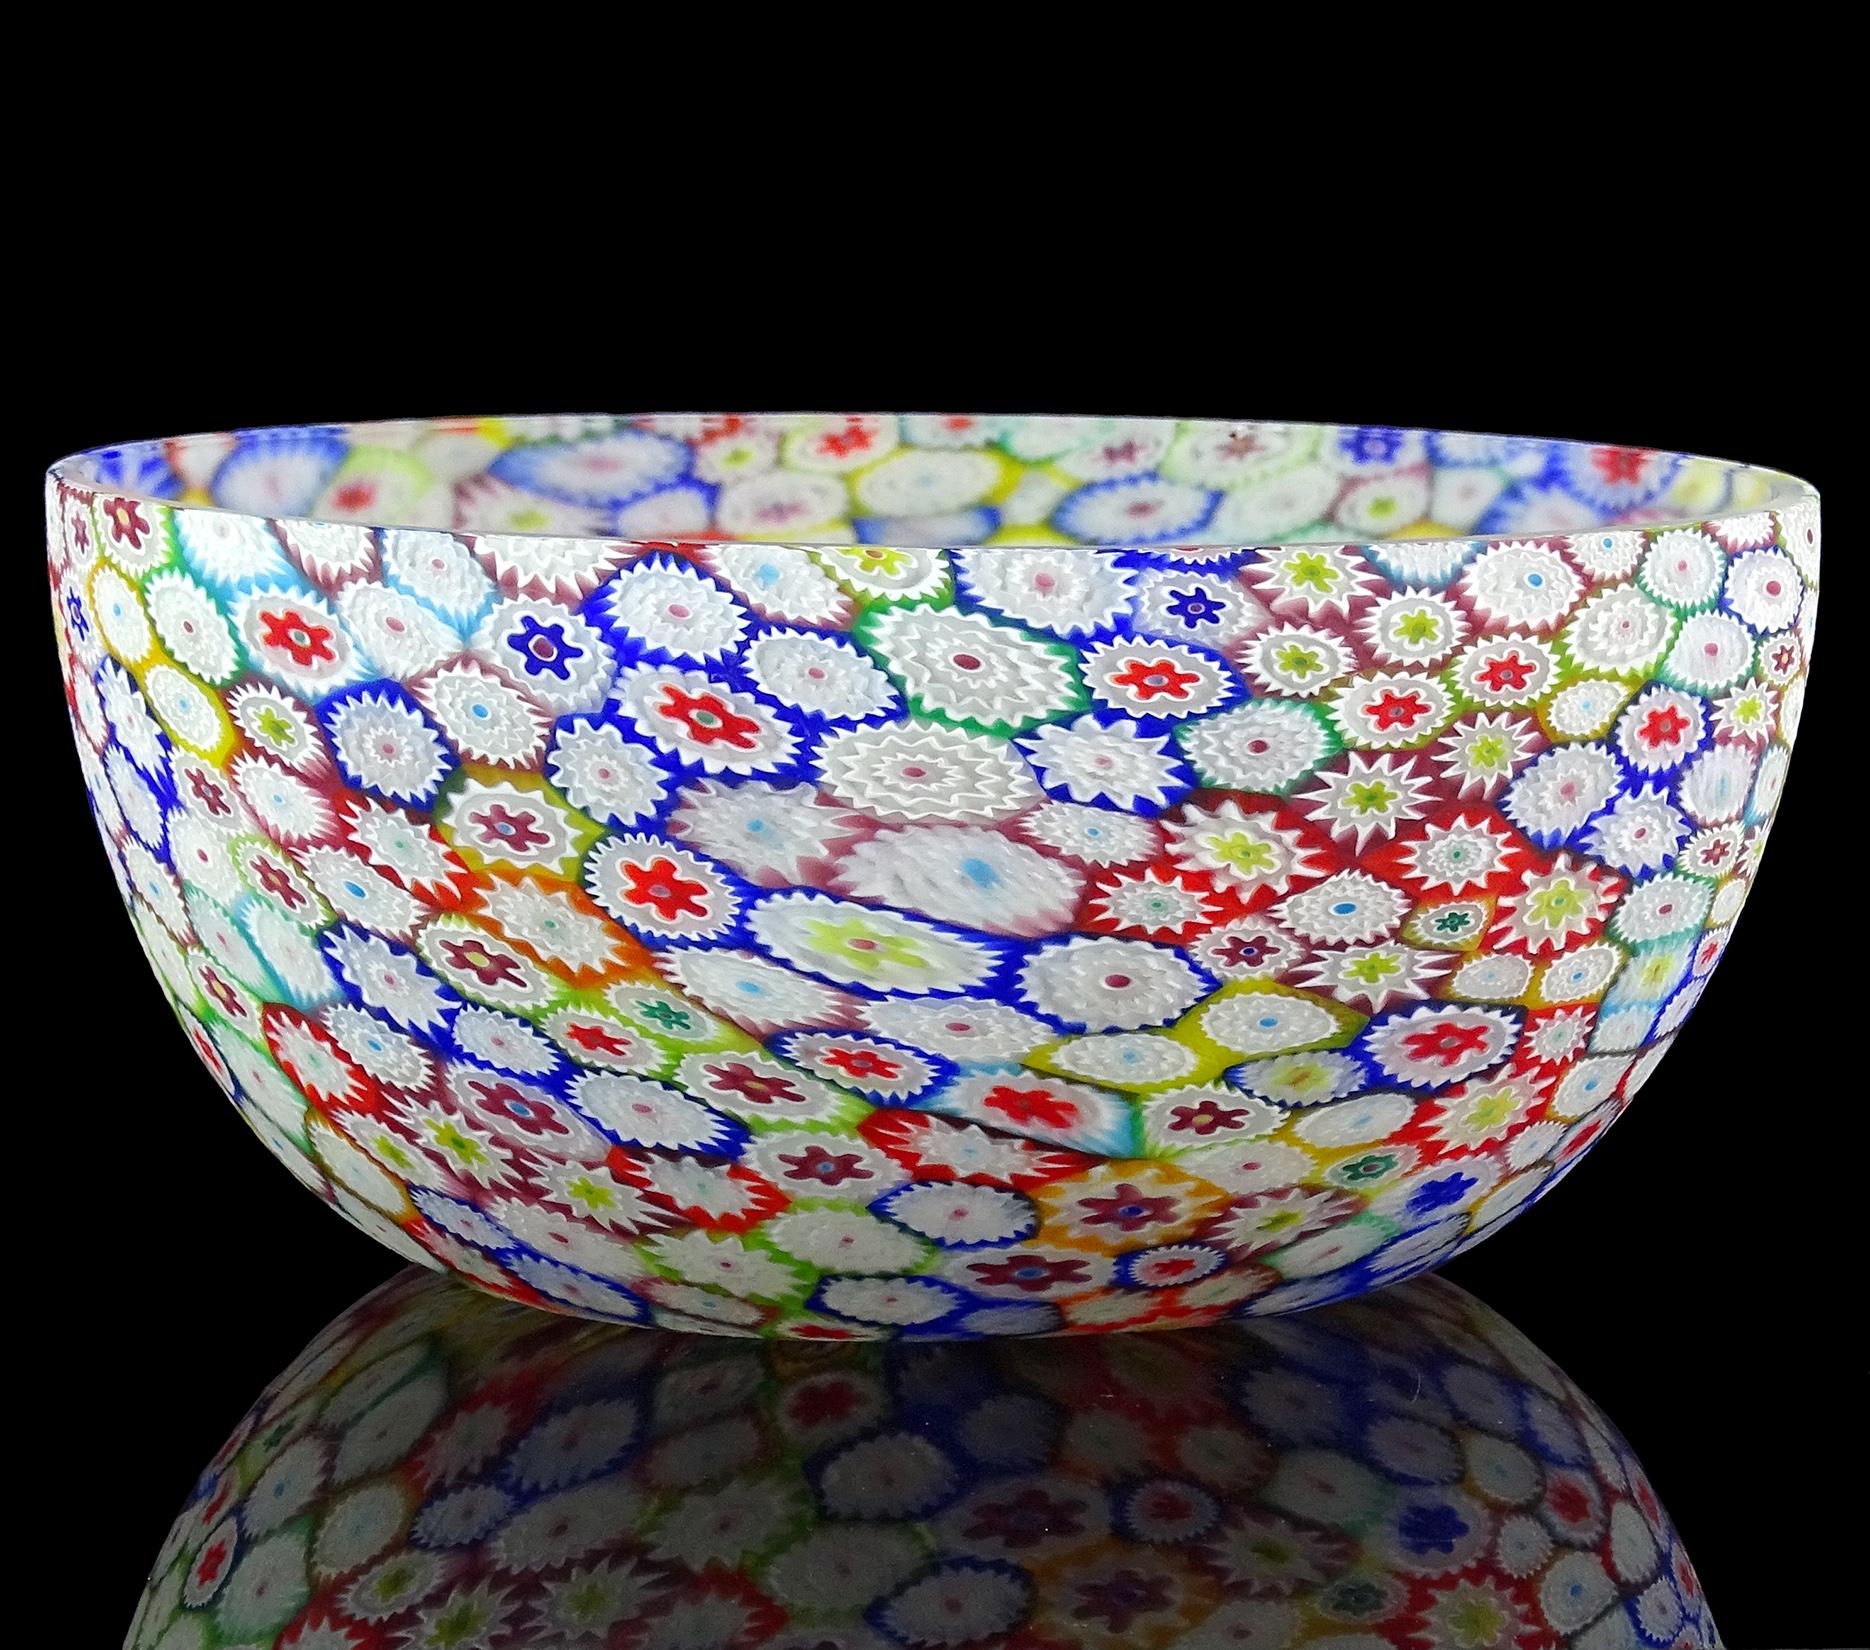 Beautiful large vintage Murano hand blown millefiori, rainbow colors, flower mosaic Italian art glass centerpiece tall bowl. Documented to the Fratelli Toso Company. The bowl has an array of colors, with white, cobalt blue, sky blue, green, yellow,